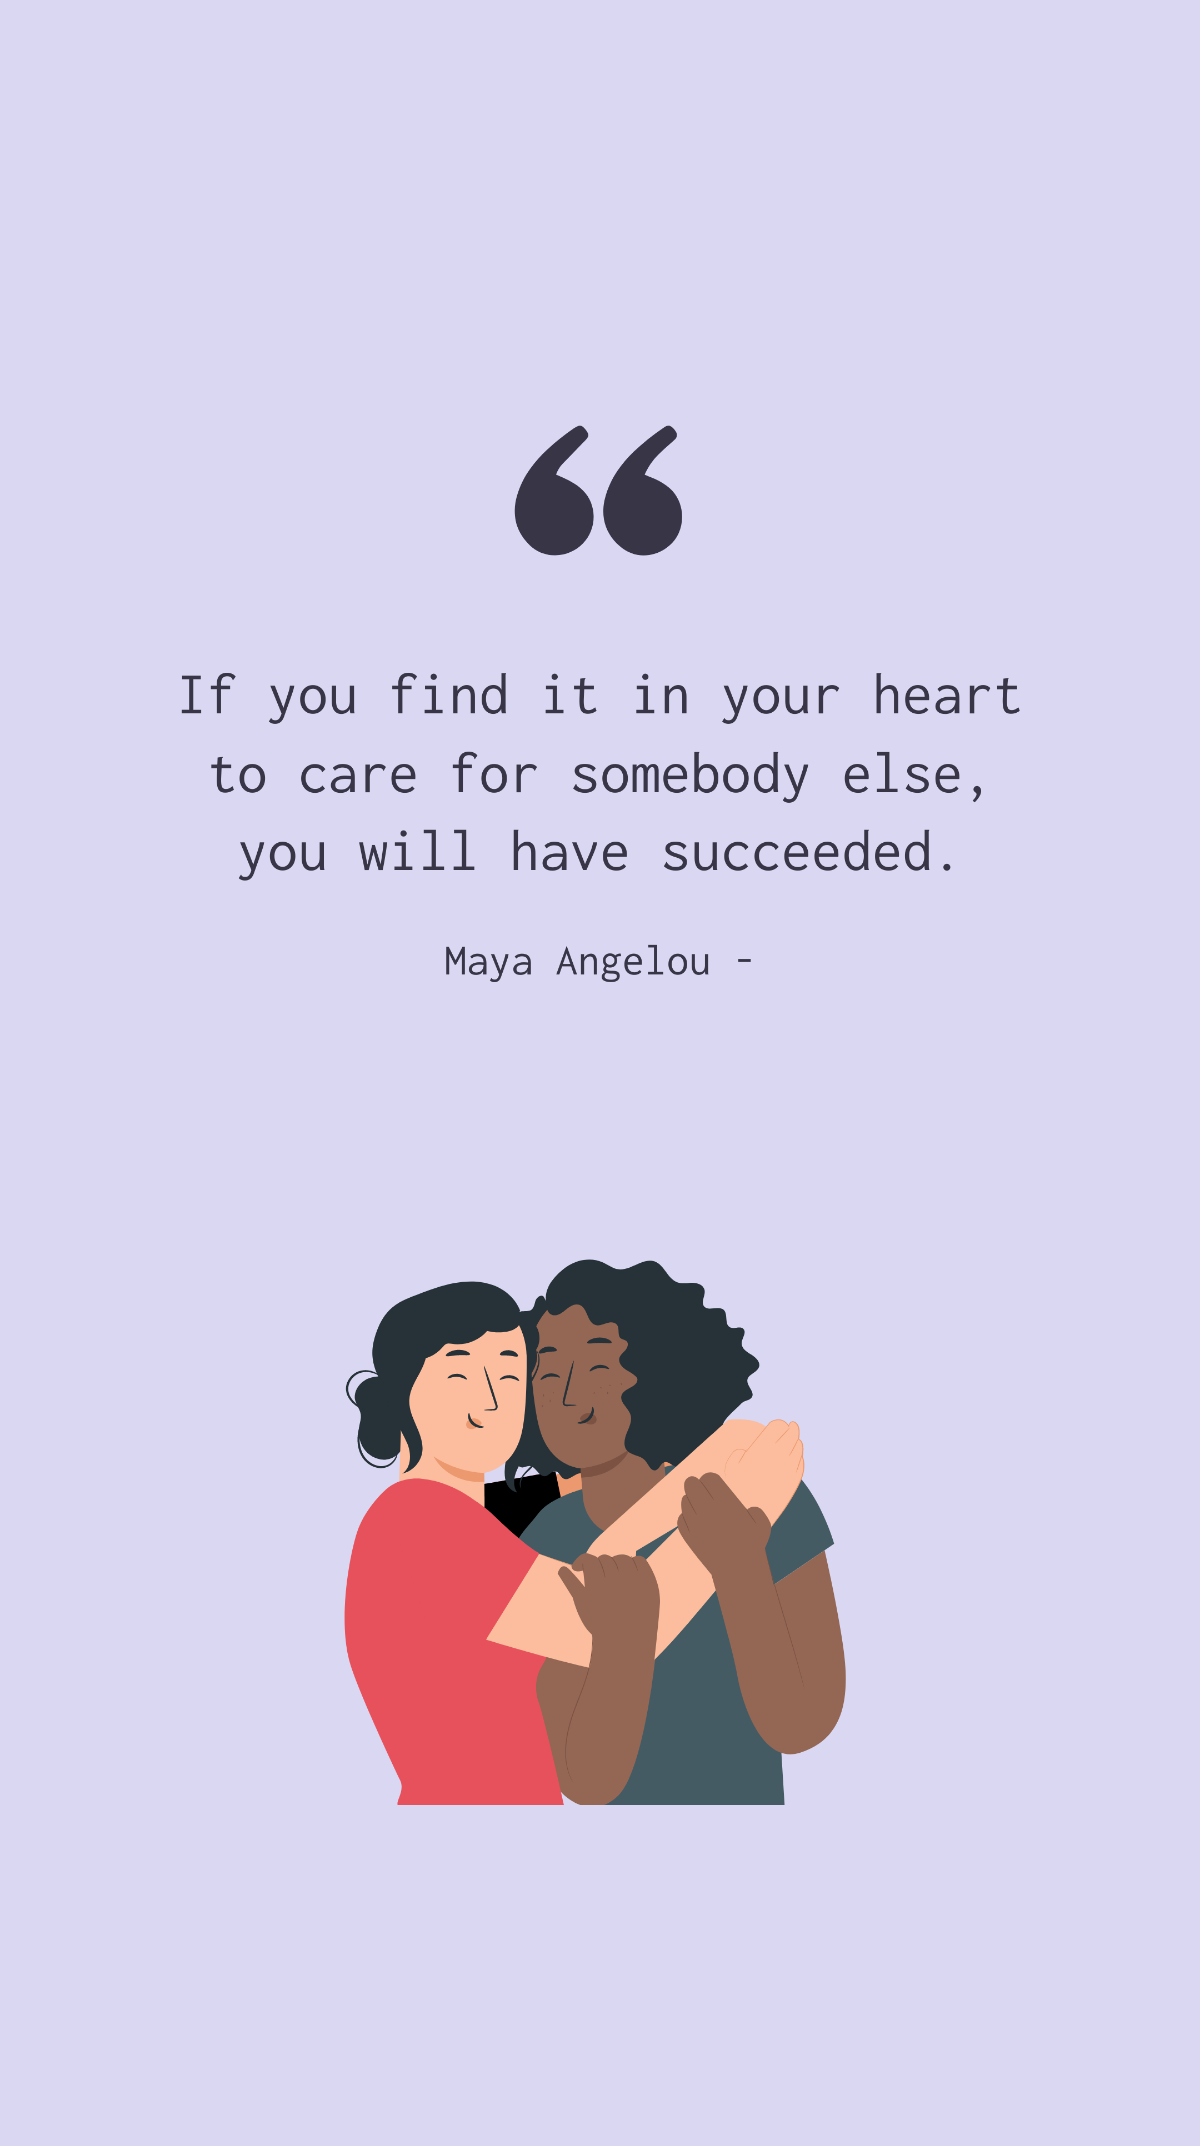 Maya Angelou - If you find it in your heart to care for somebody else, you will have succeeded. Template